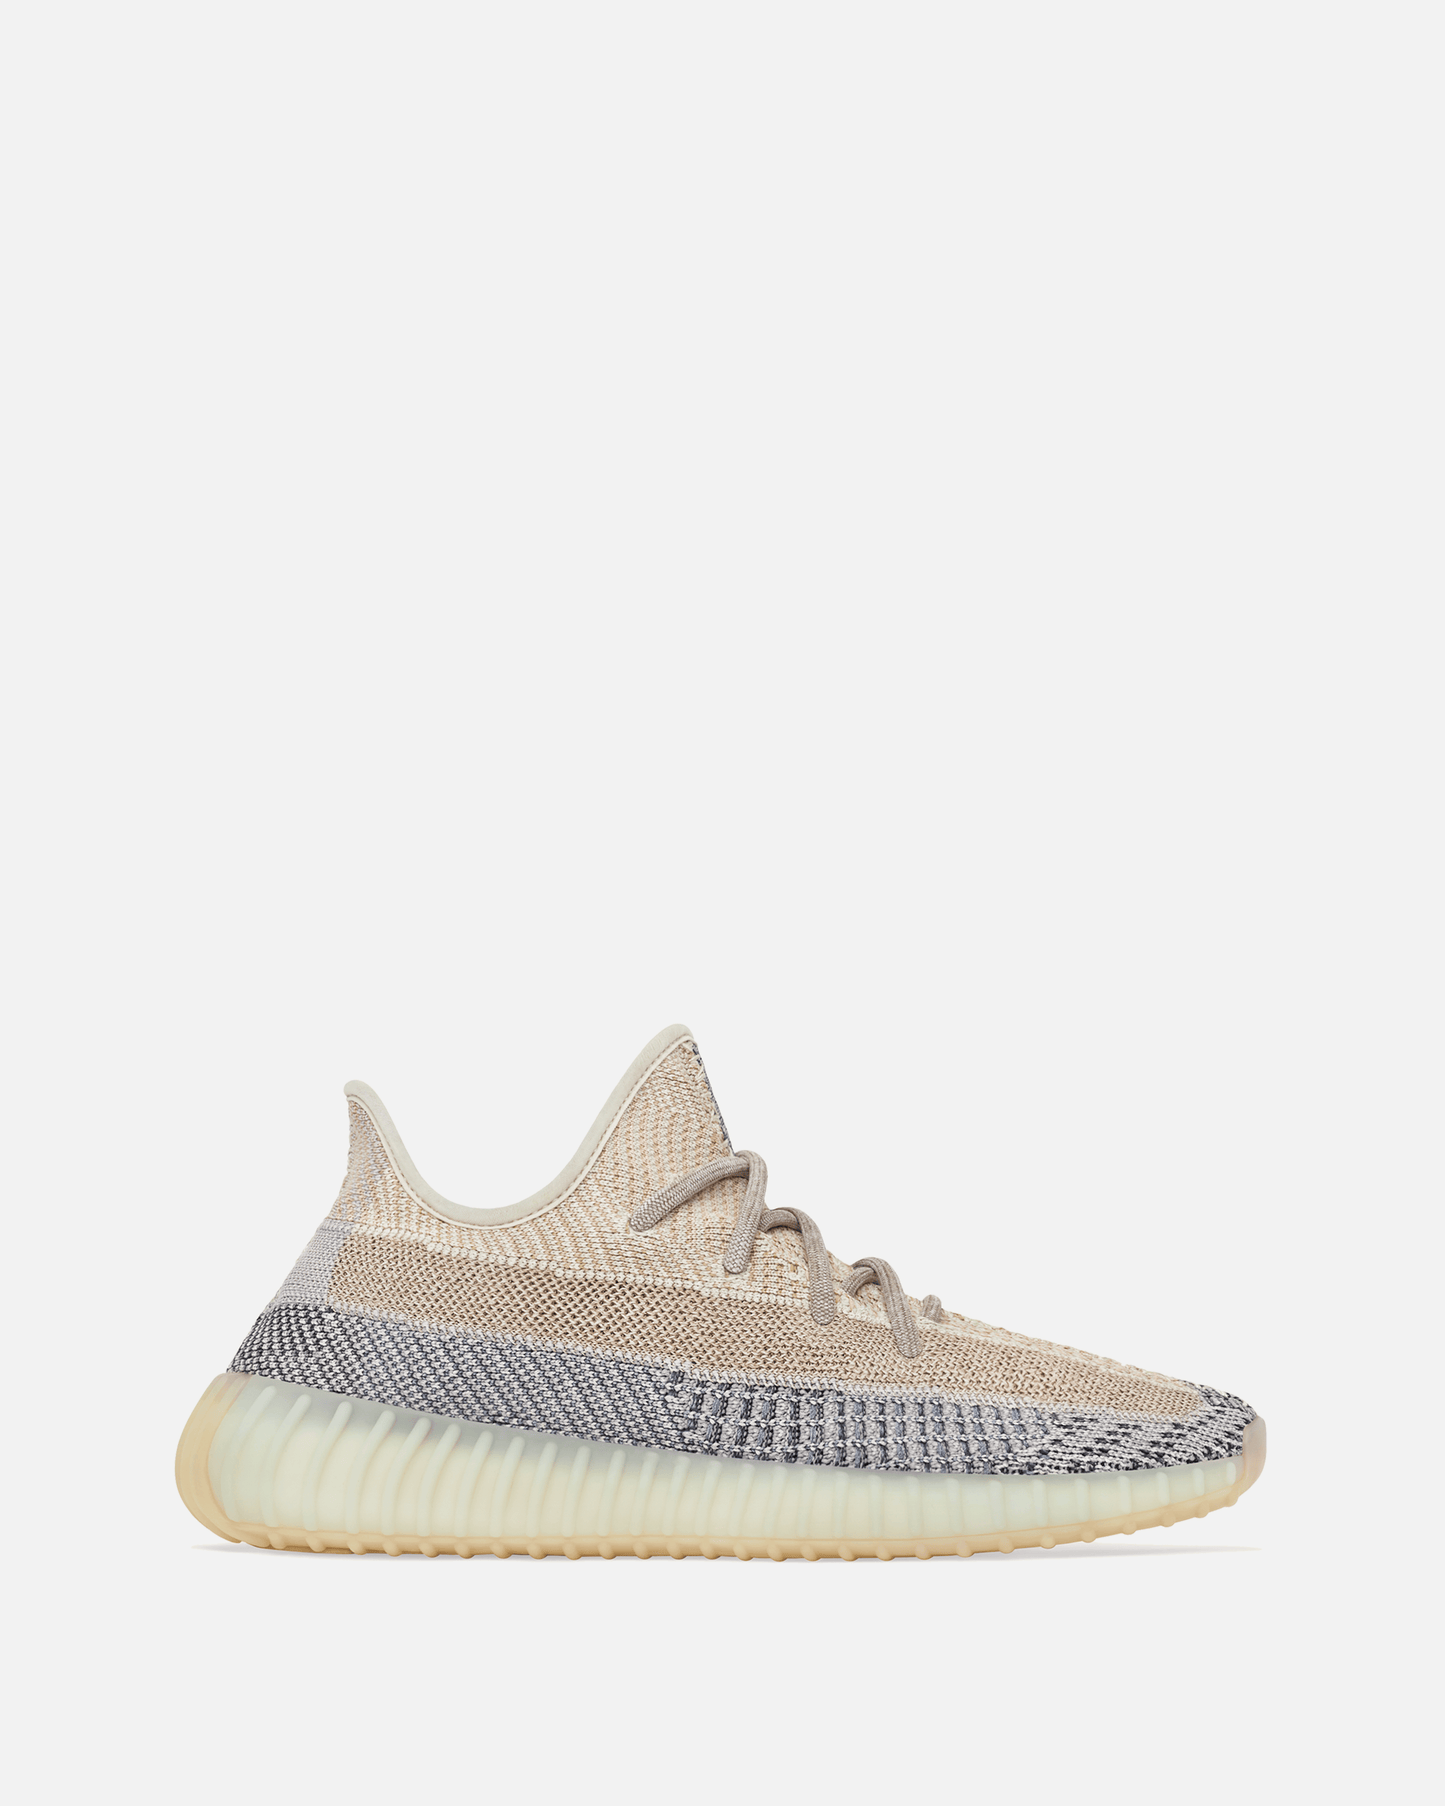 Adidas Releases Yeezy 350 V2 'Ash Pearl'